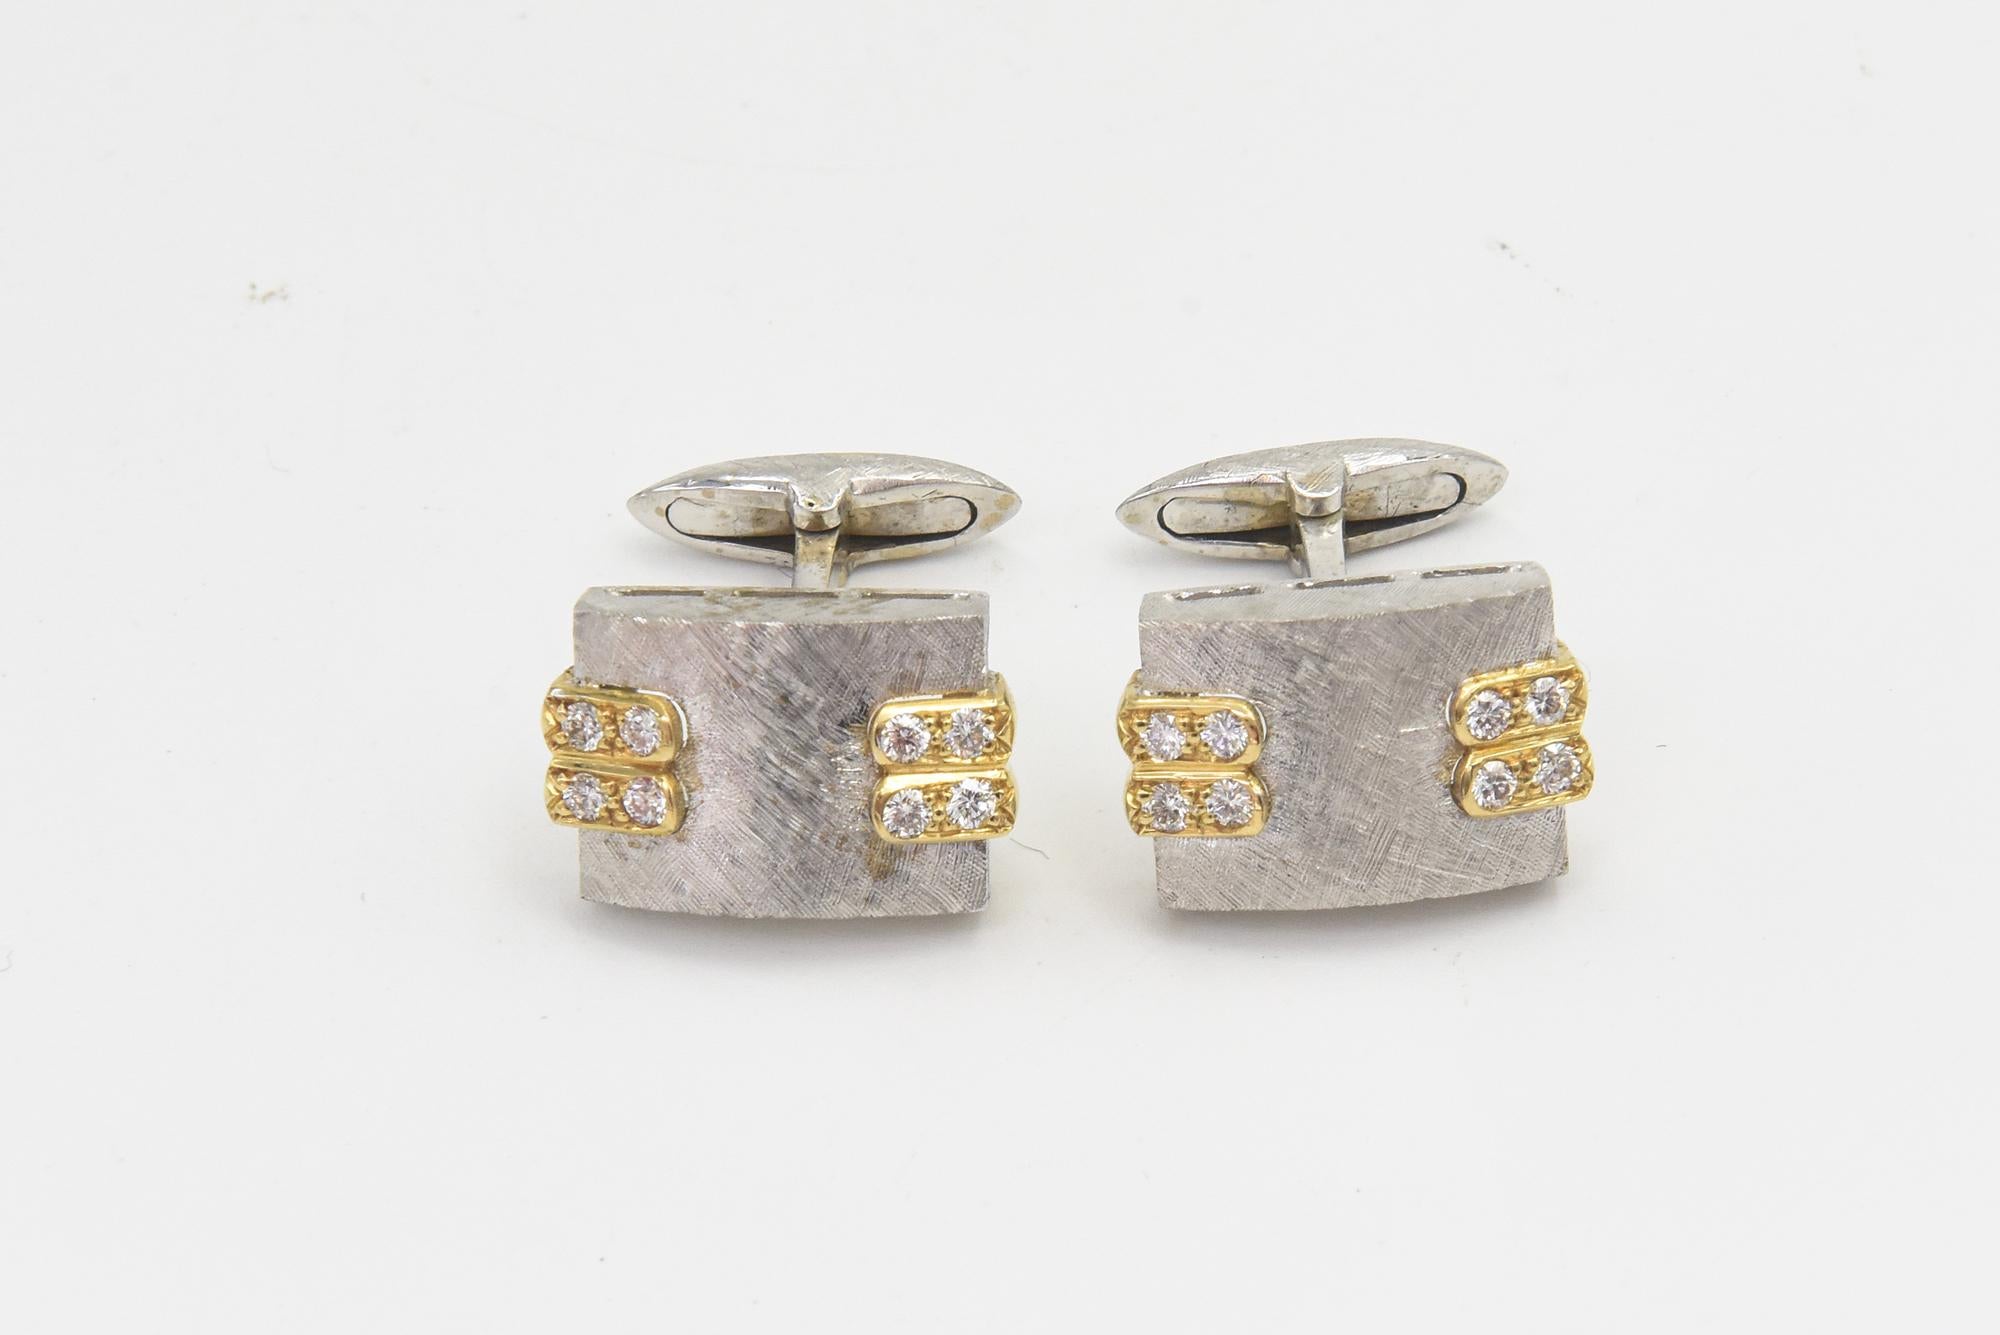 These elegant 1970s cufflinks feature an 18k white gold rectangle with a Florentine finish with 2 diamond bar yellow gold accents on either side.  Even the t-bar closure has a white gold Florentine finish.  Marked 18k BAGH and in a box from NY